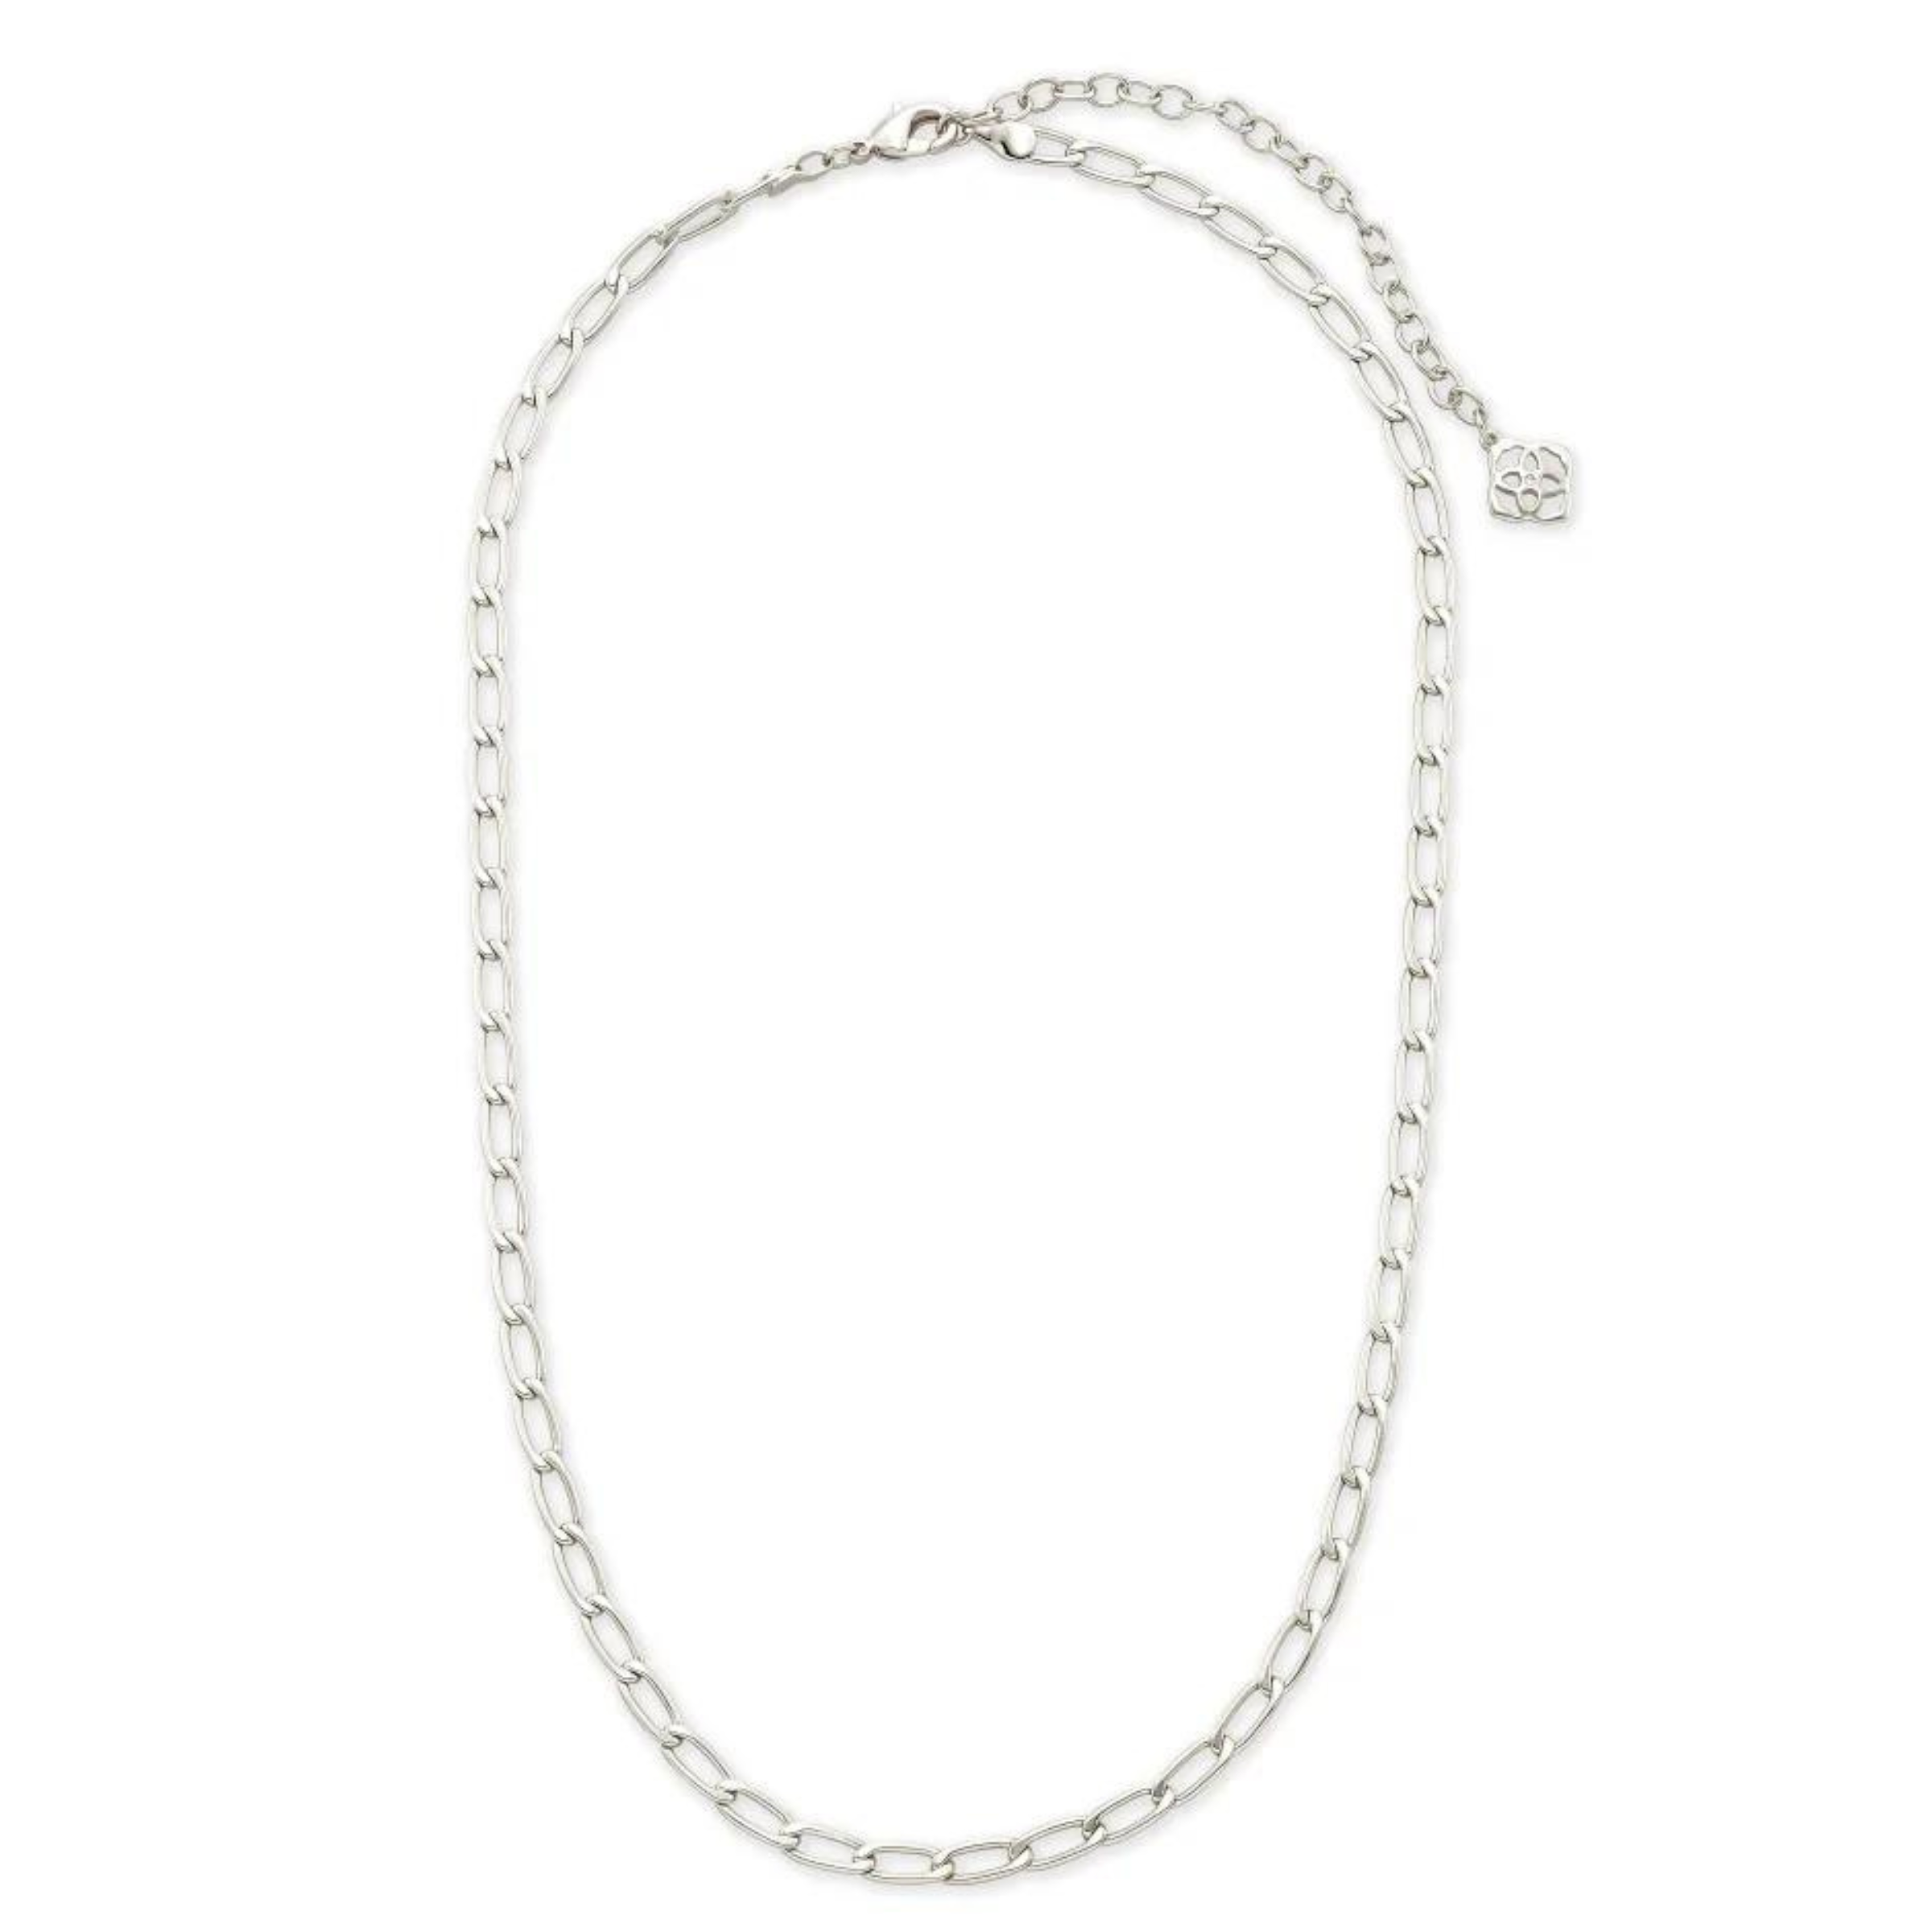 Kendra Scott | Merrick Chain Necklace in Silver - Giddy Up Glamour Boutique